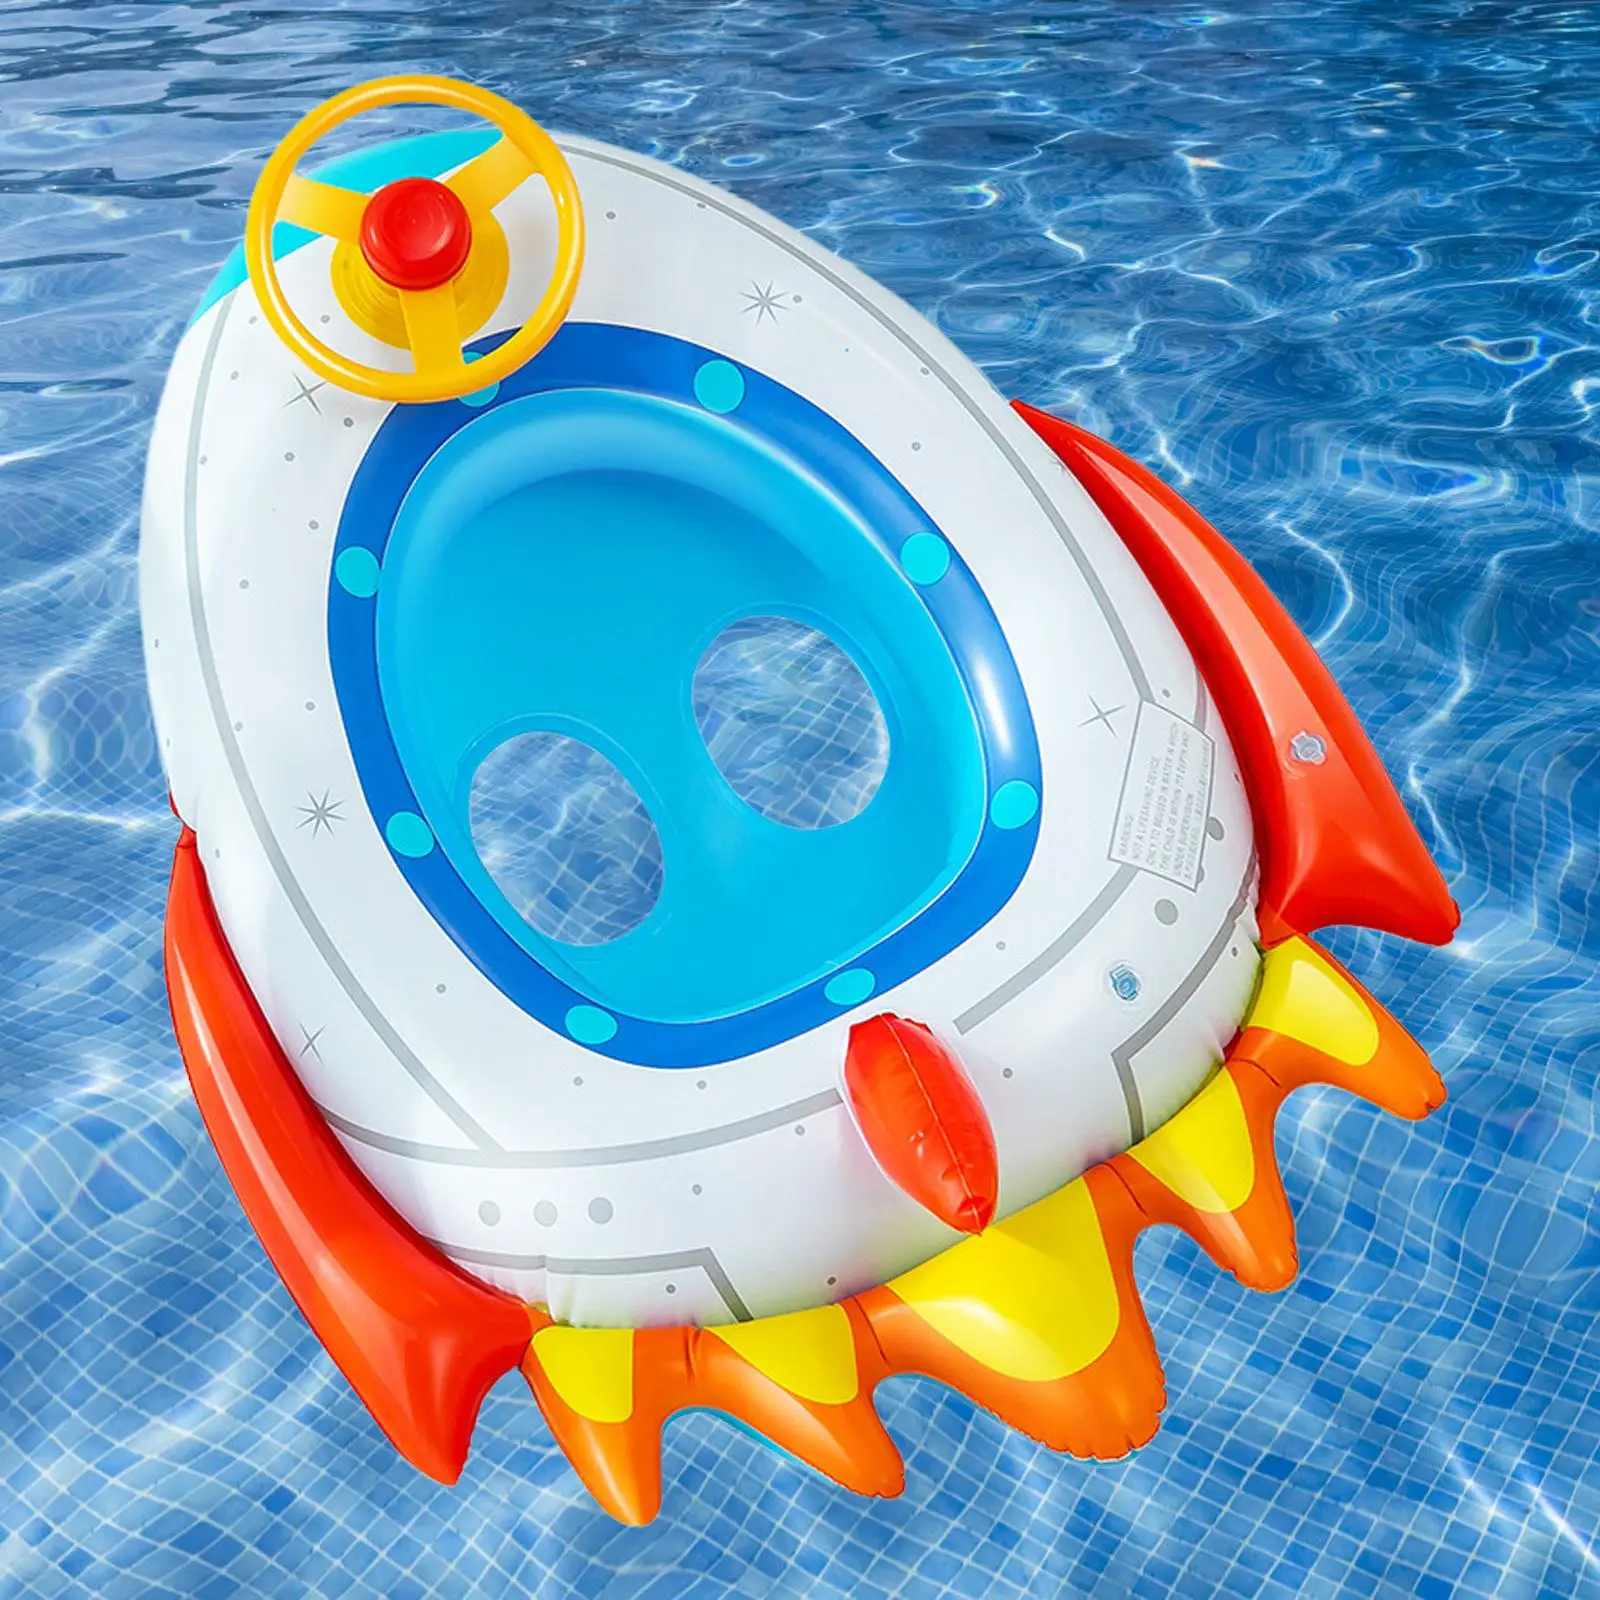 Pool Children Toy Float Infant Training PVC Summer Bath Float Float Beach Toys for 3-36 Months Toddlers Babies Newborn